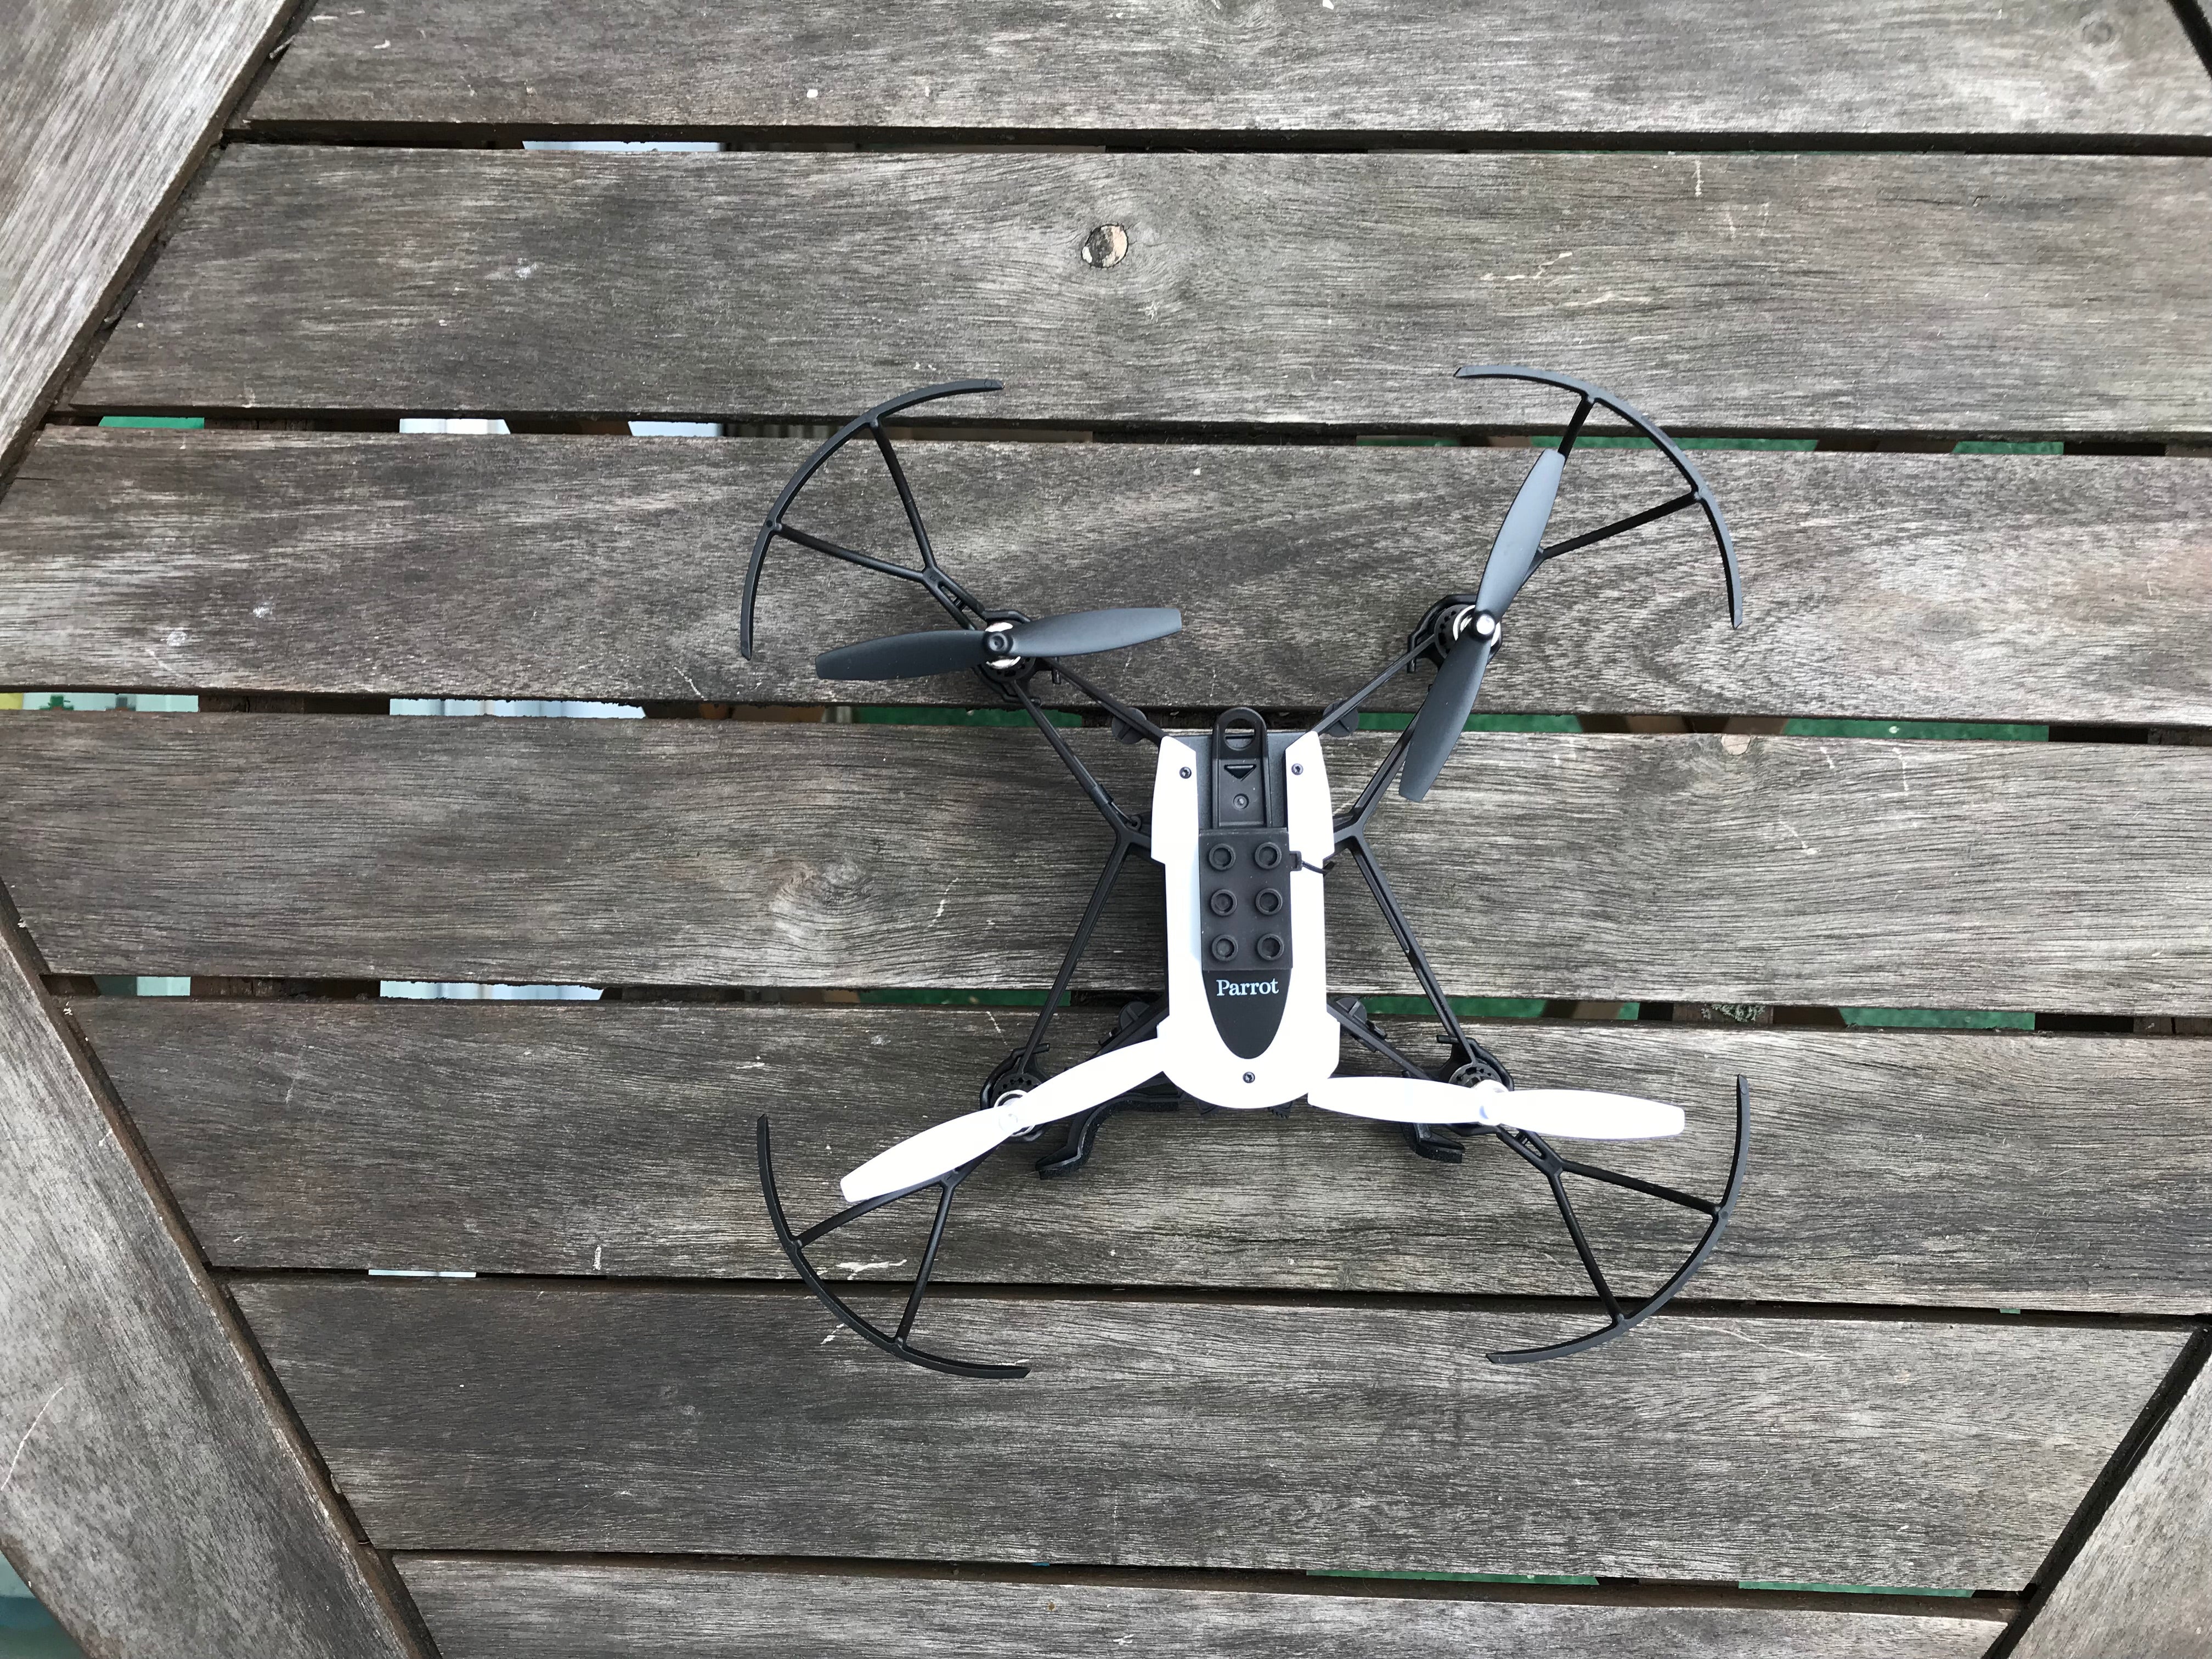 Parrot Mambo drone with propeller guards on wooden deck.